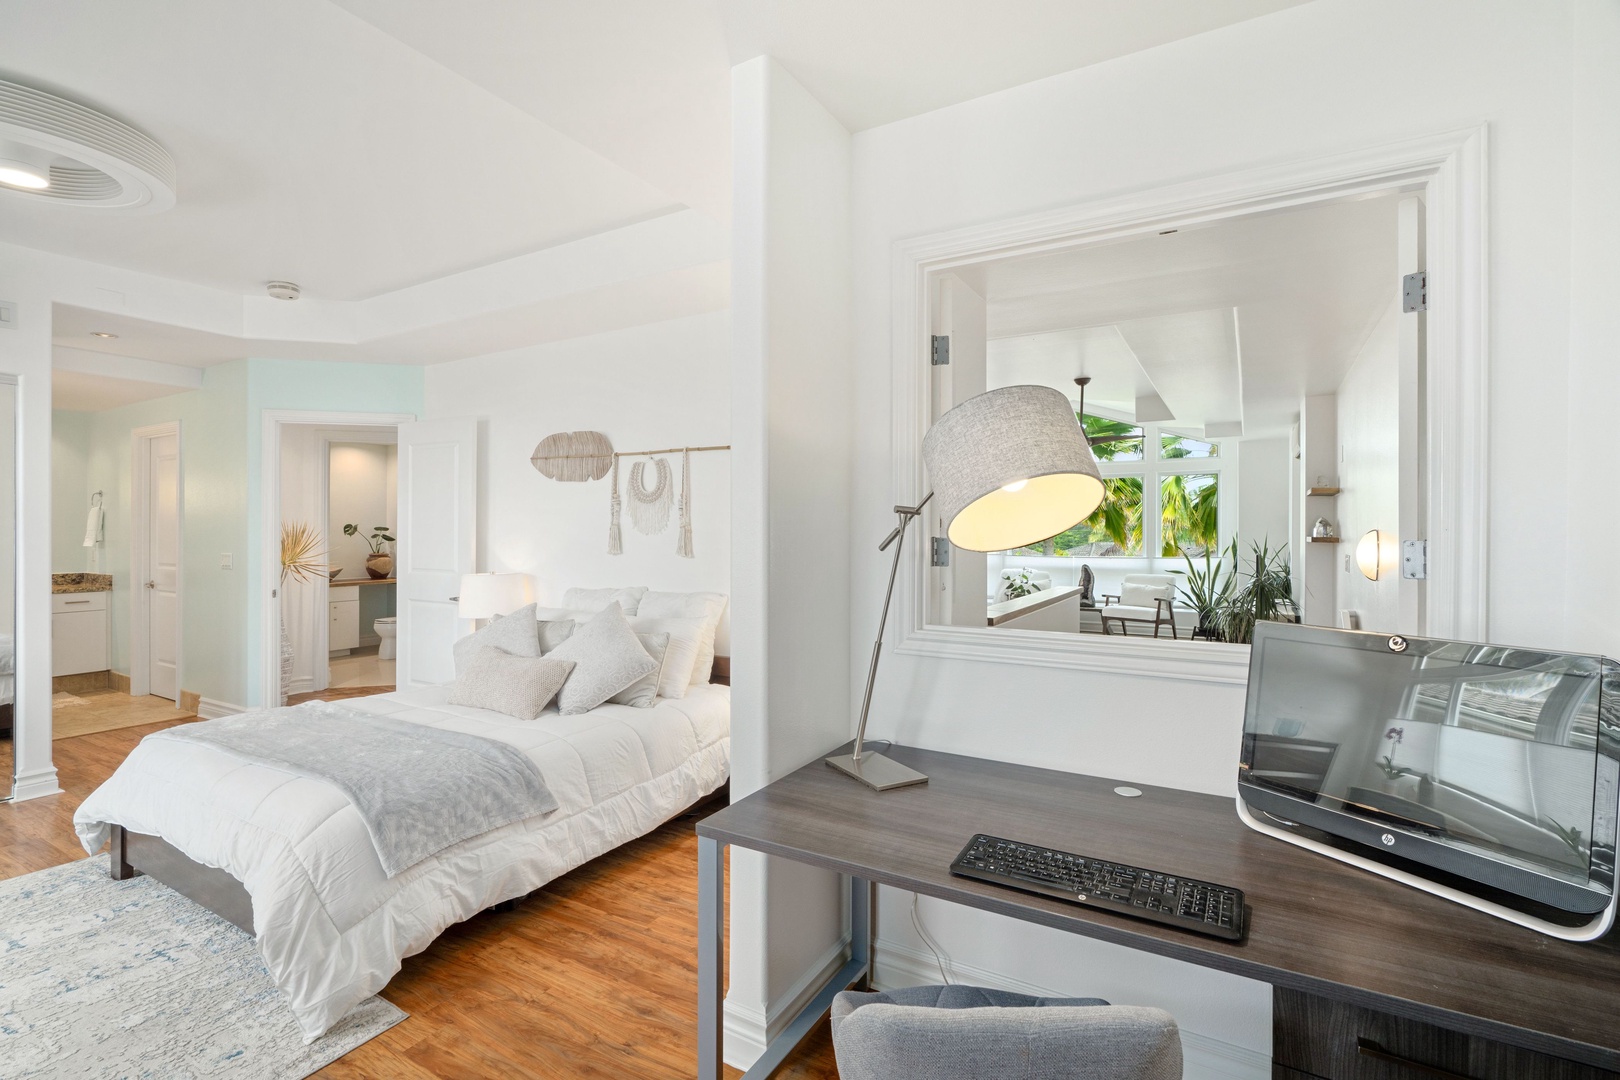 Princeville Vacation Rentals, Tropical Elegance - Stay productive and connected in the convenience of the suite's well-appointed home office space.